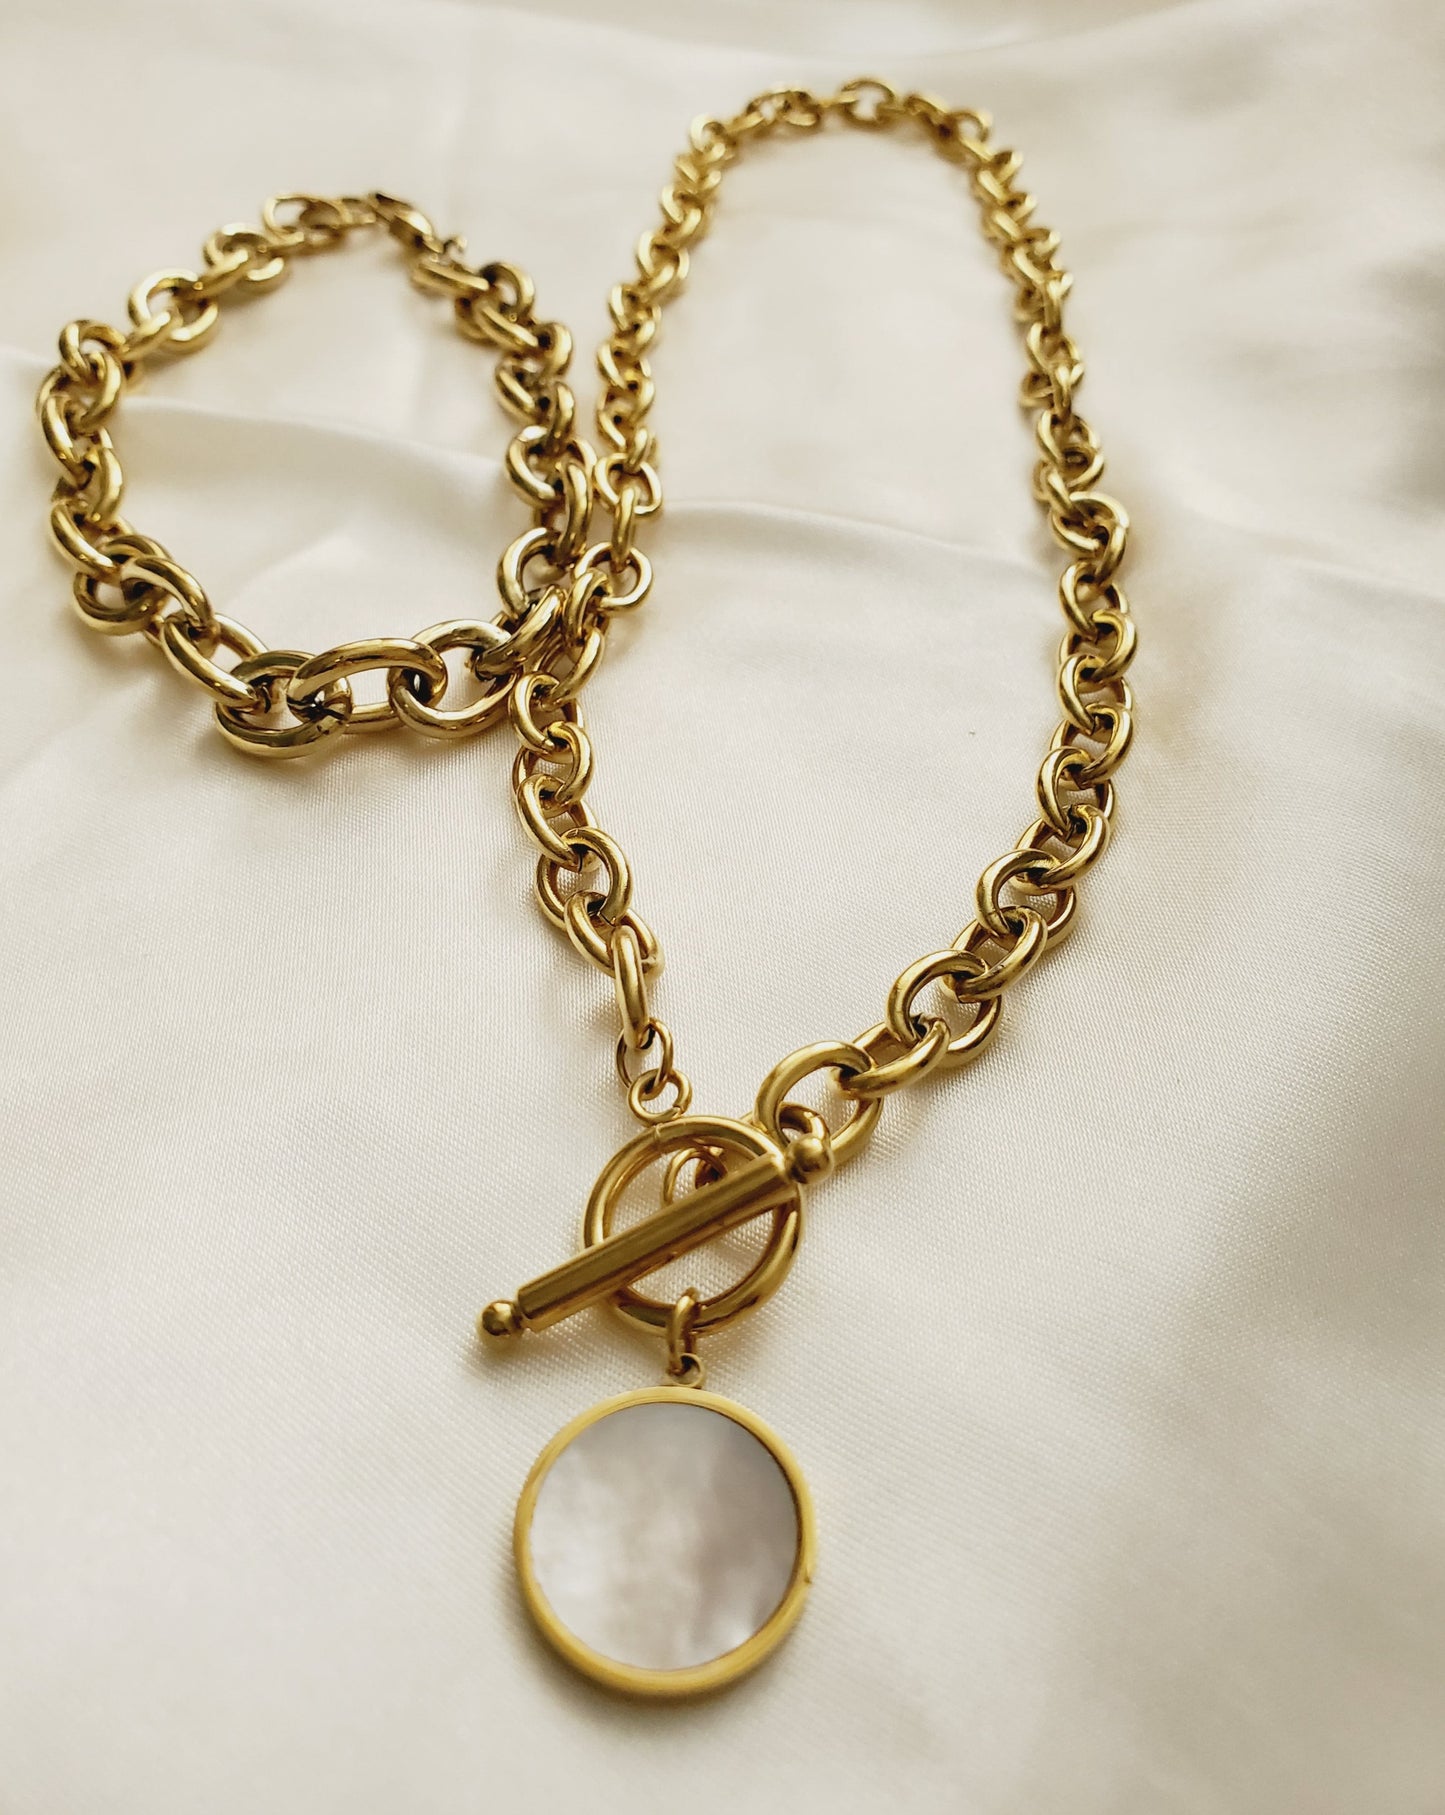 Baroque Pearls necklace, pearl necklace, lock necklace, pearls and lock necklace,  Vintage Style, Elegant Mother of Pearl Geometric Gold Necklace, Handcrafted Geometric Gold Necklace with Mother of Pearl, Timeless Mother of Pearl Pendant Necklace in Gold,   Vintage Set  Vintage Outfit  Vintage Necklaces